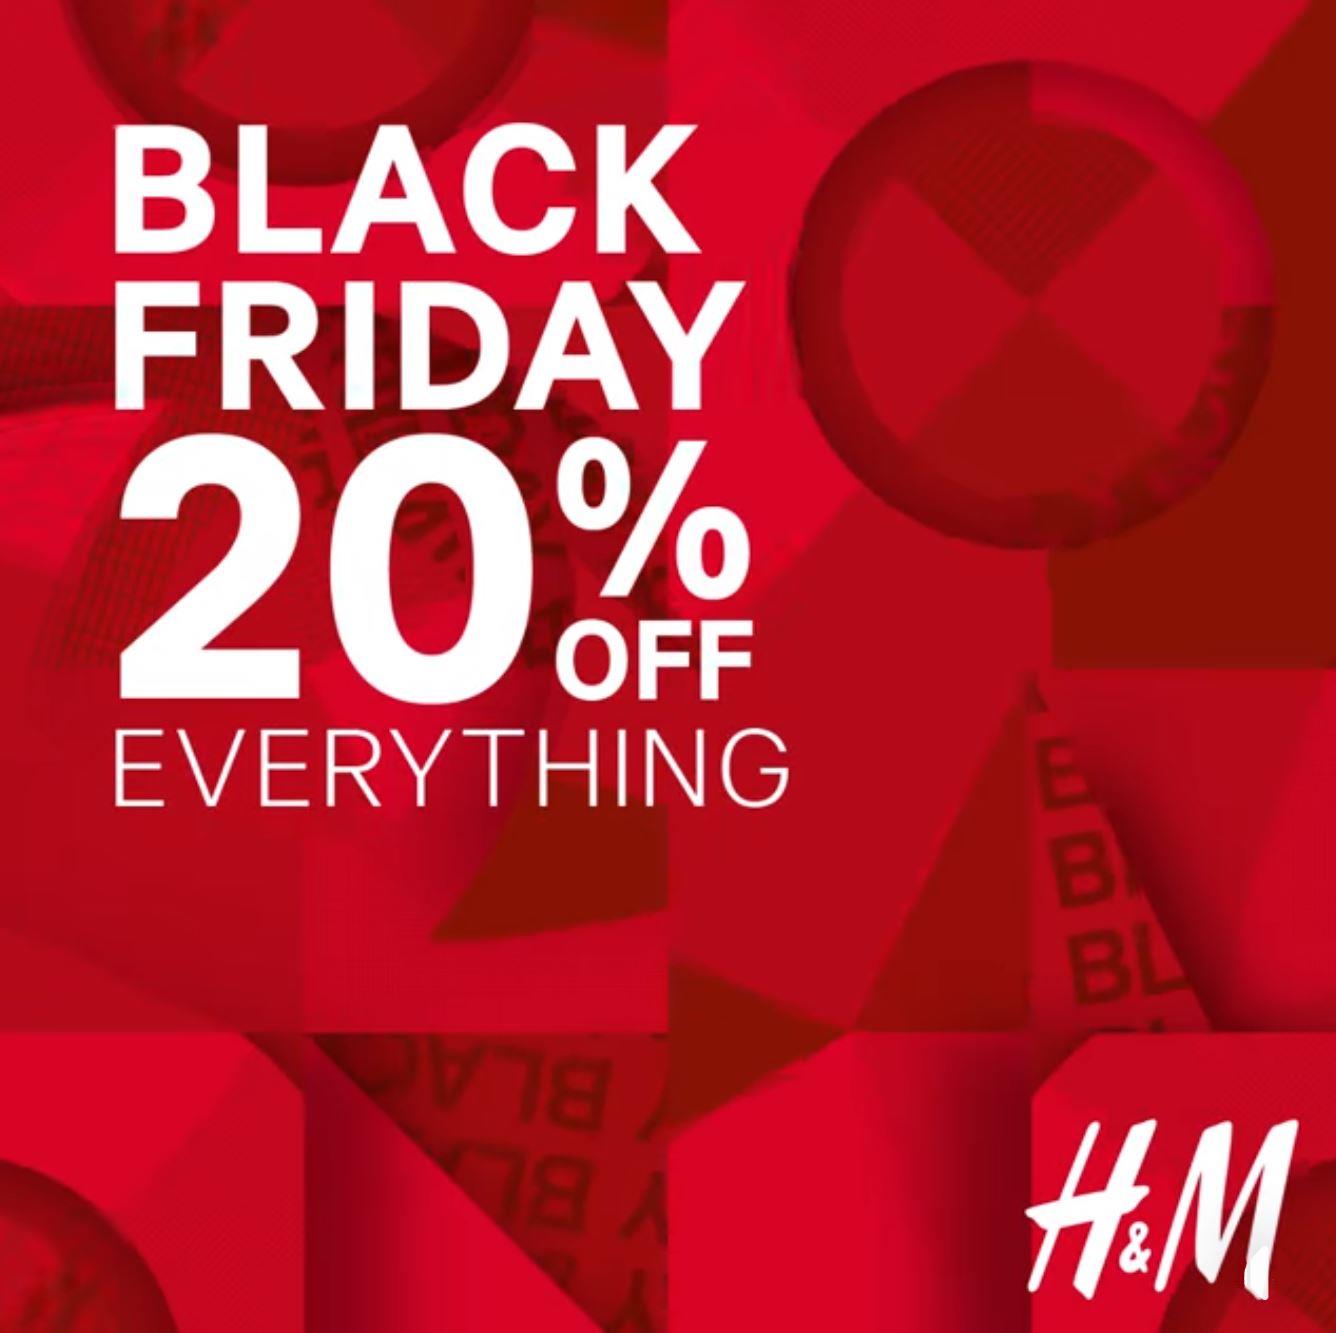 H&M Black Friday Deals Get 20 off on everything! in Mumbai